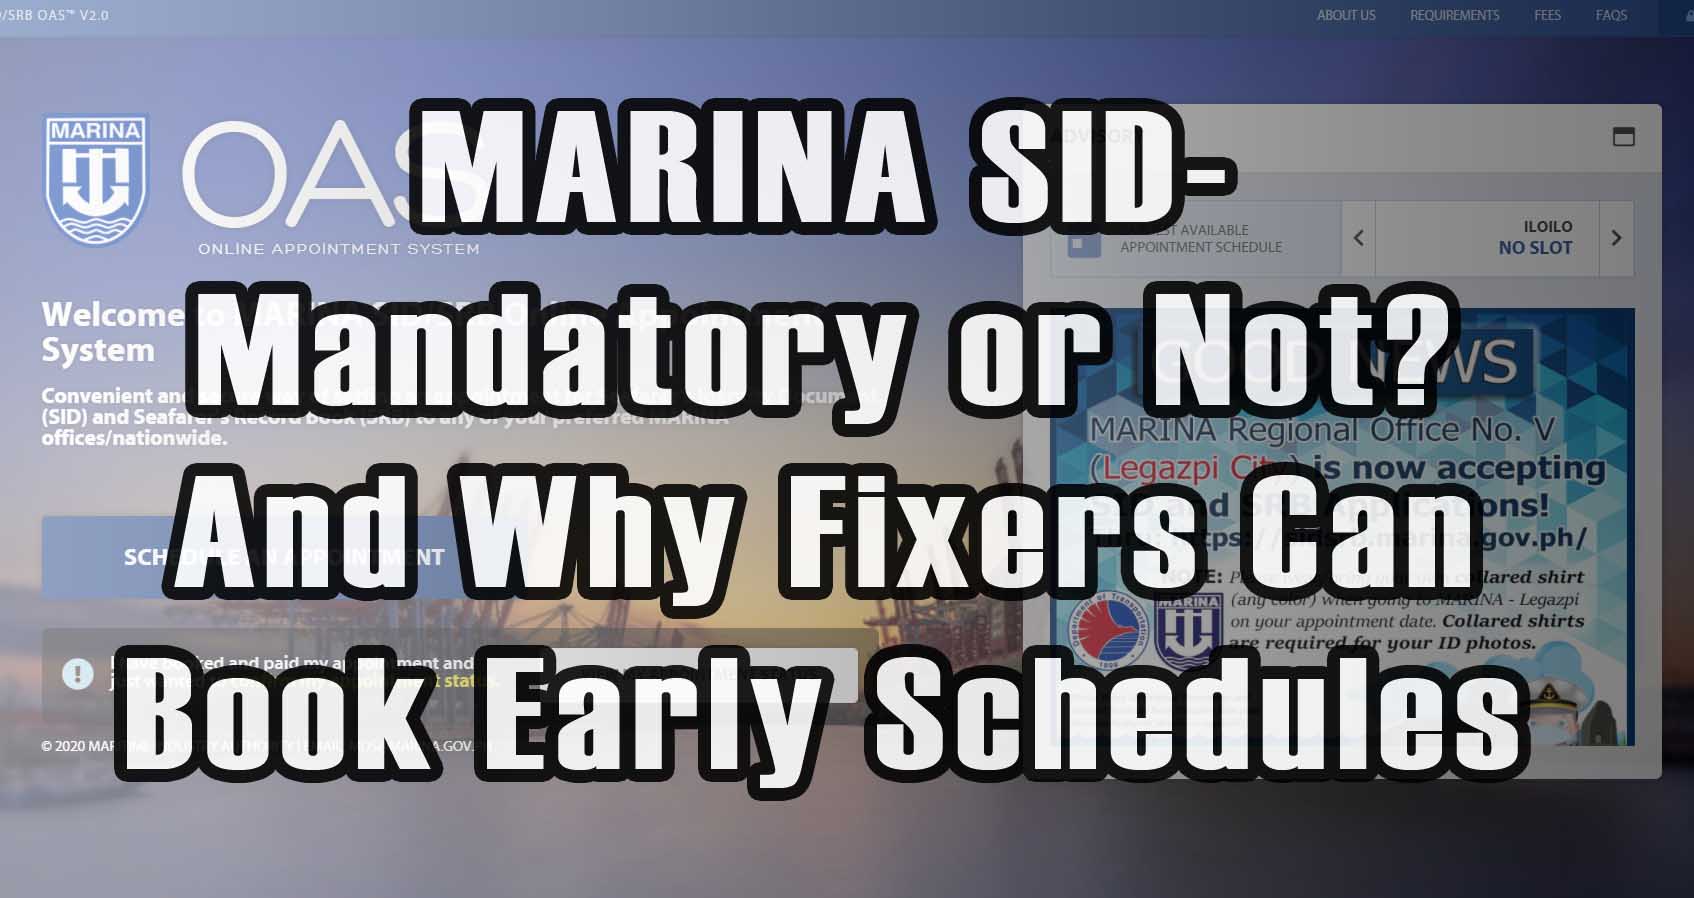 Featured image for the article, "MARINA SID- Mandatory or Not? And Why Fixers Can Book Their Schedules"